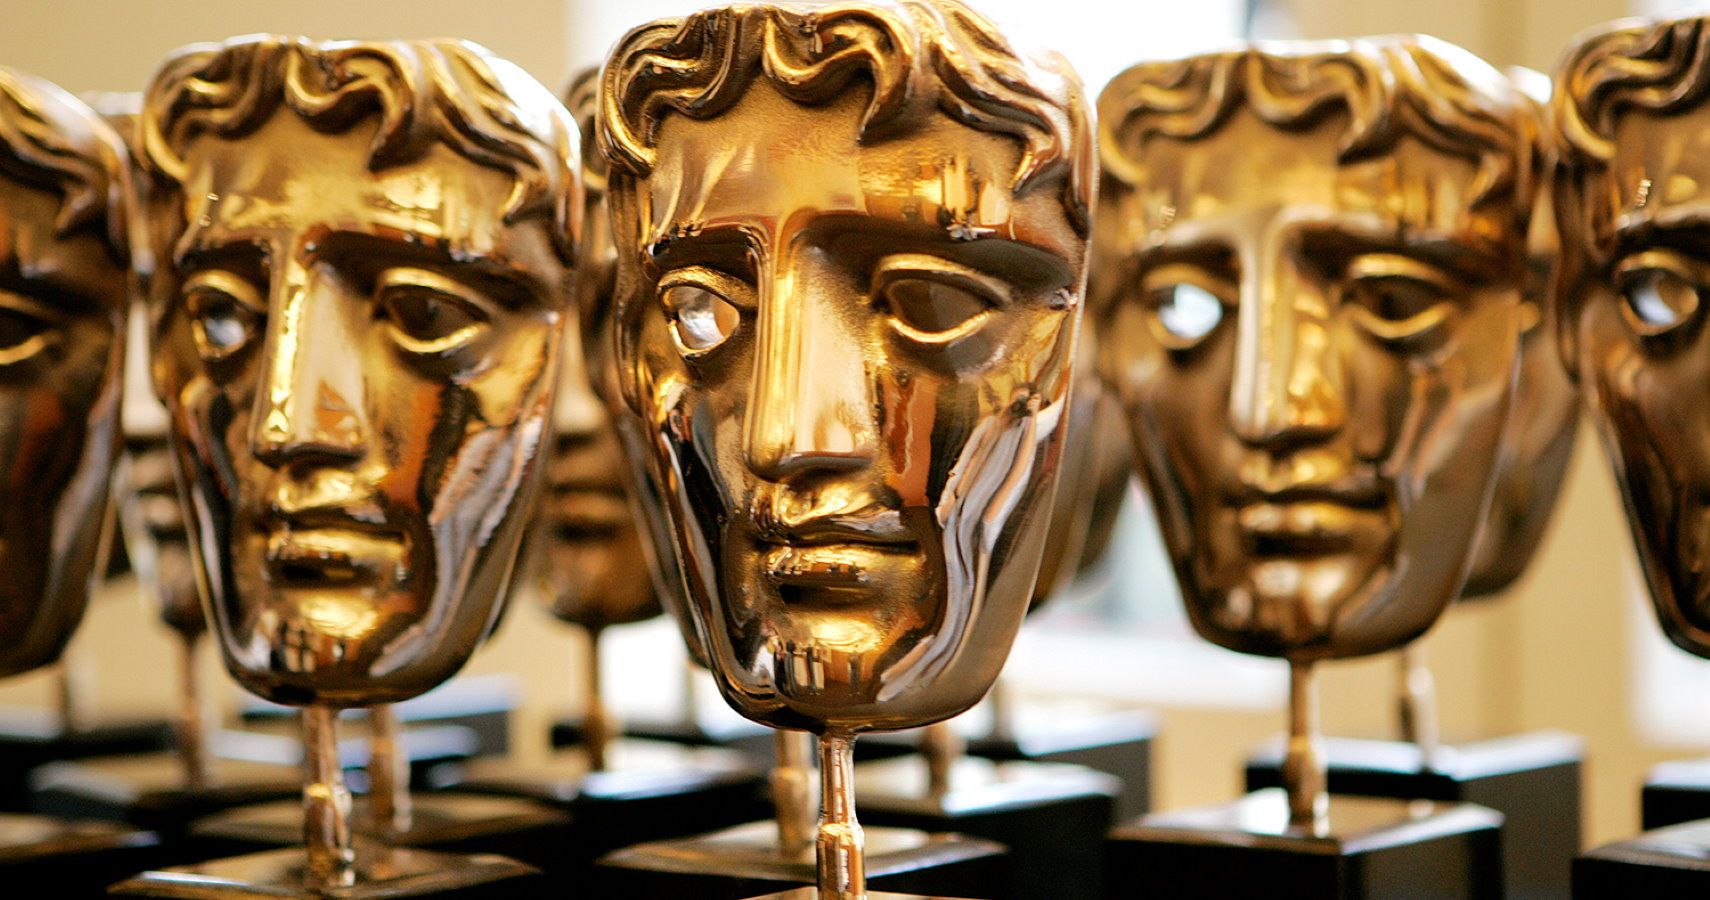 Next Years BAFTA Awards Will Require Entrants To Show Their Diversity